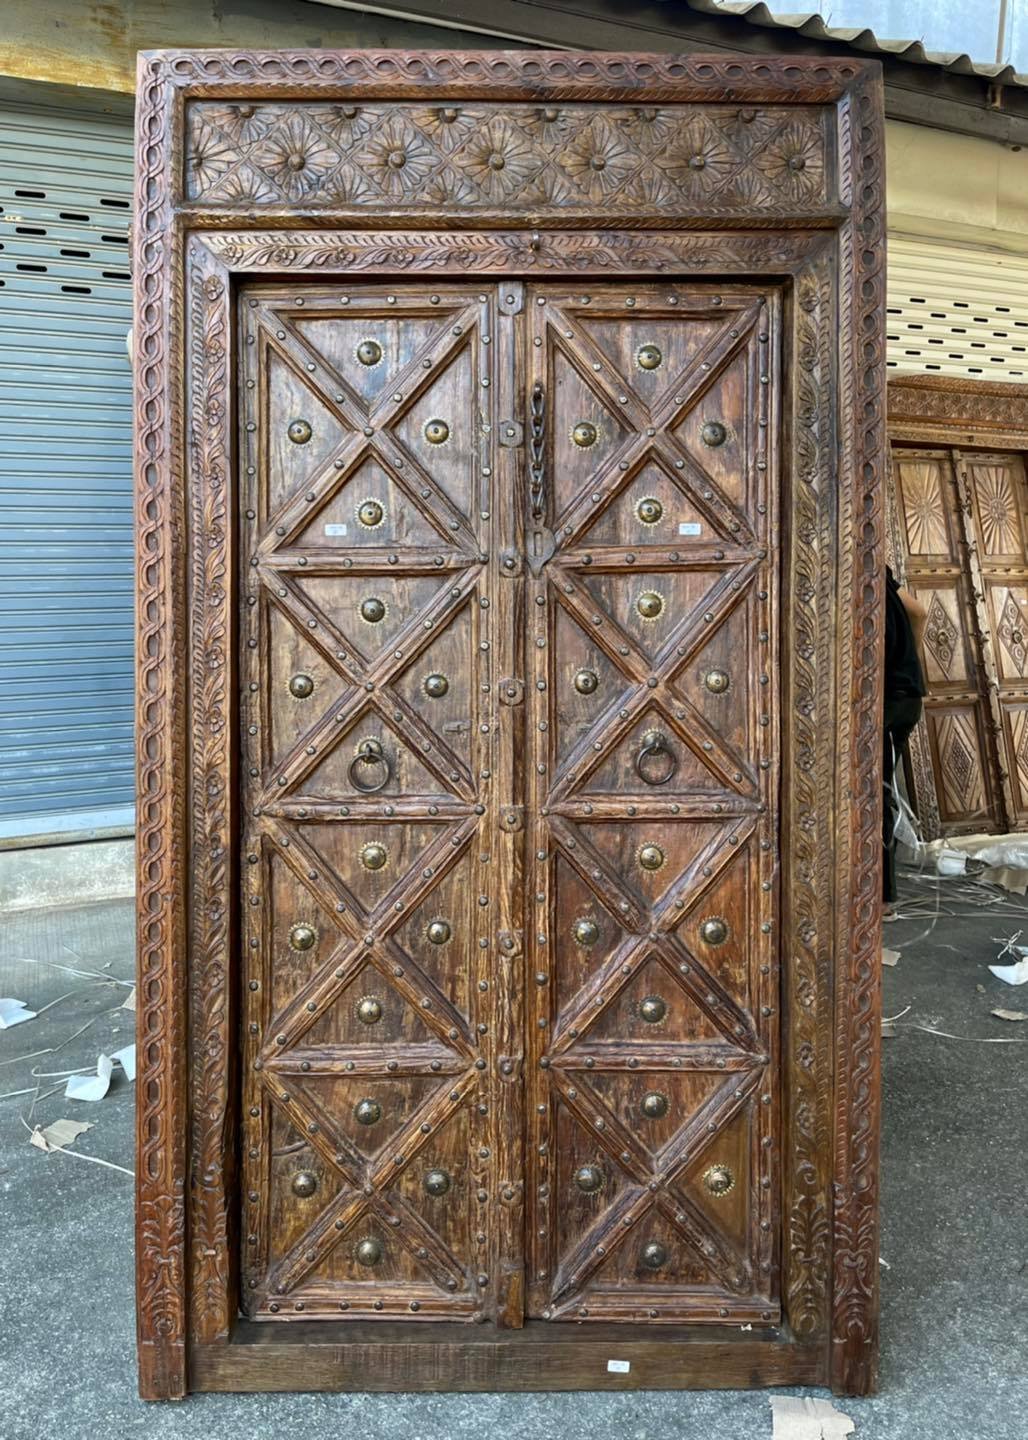 L64 Antique Door with Carving and Brass